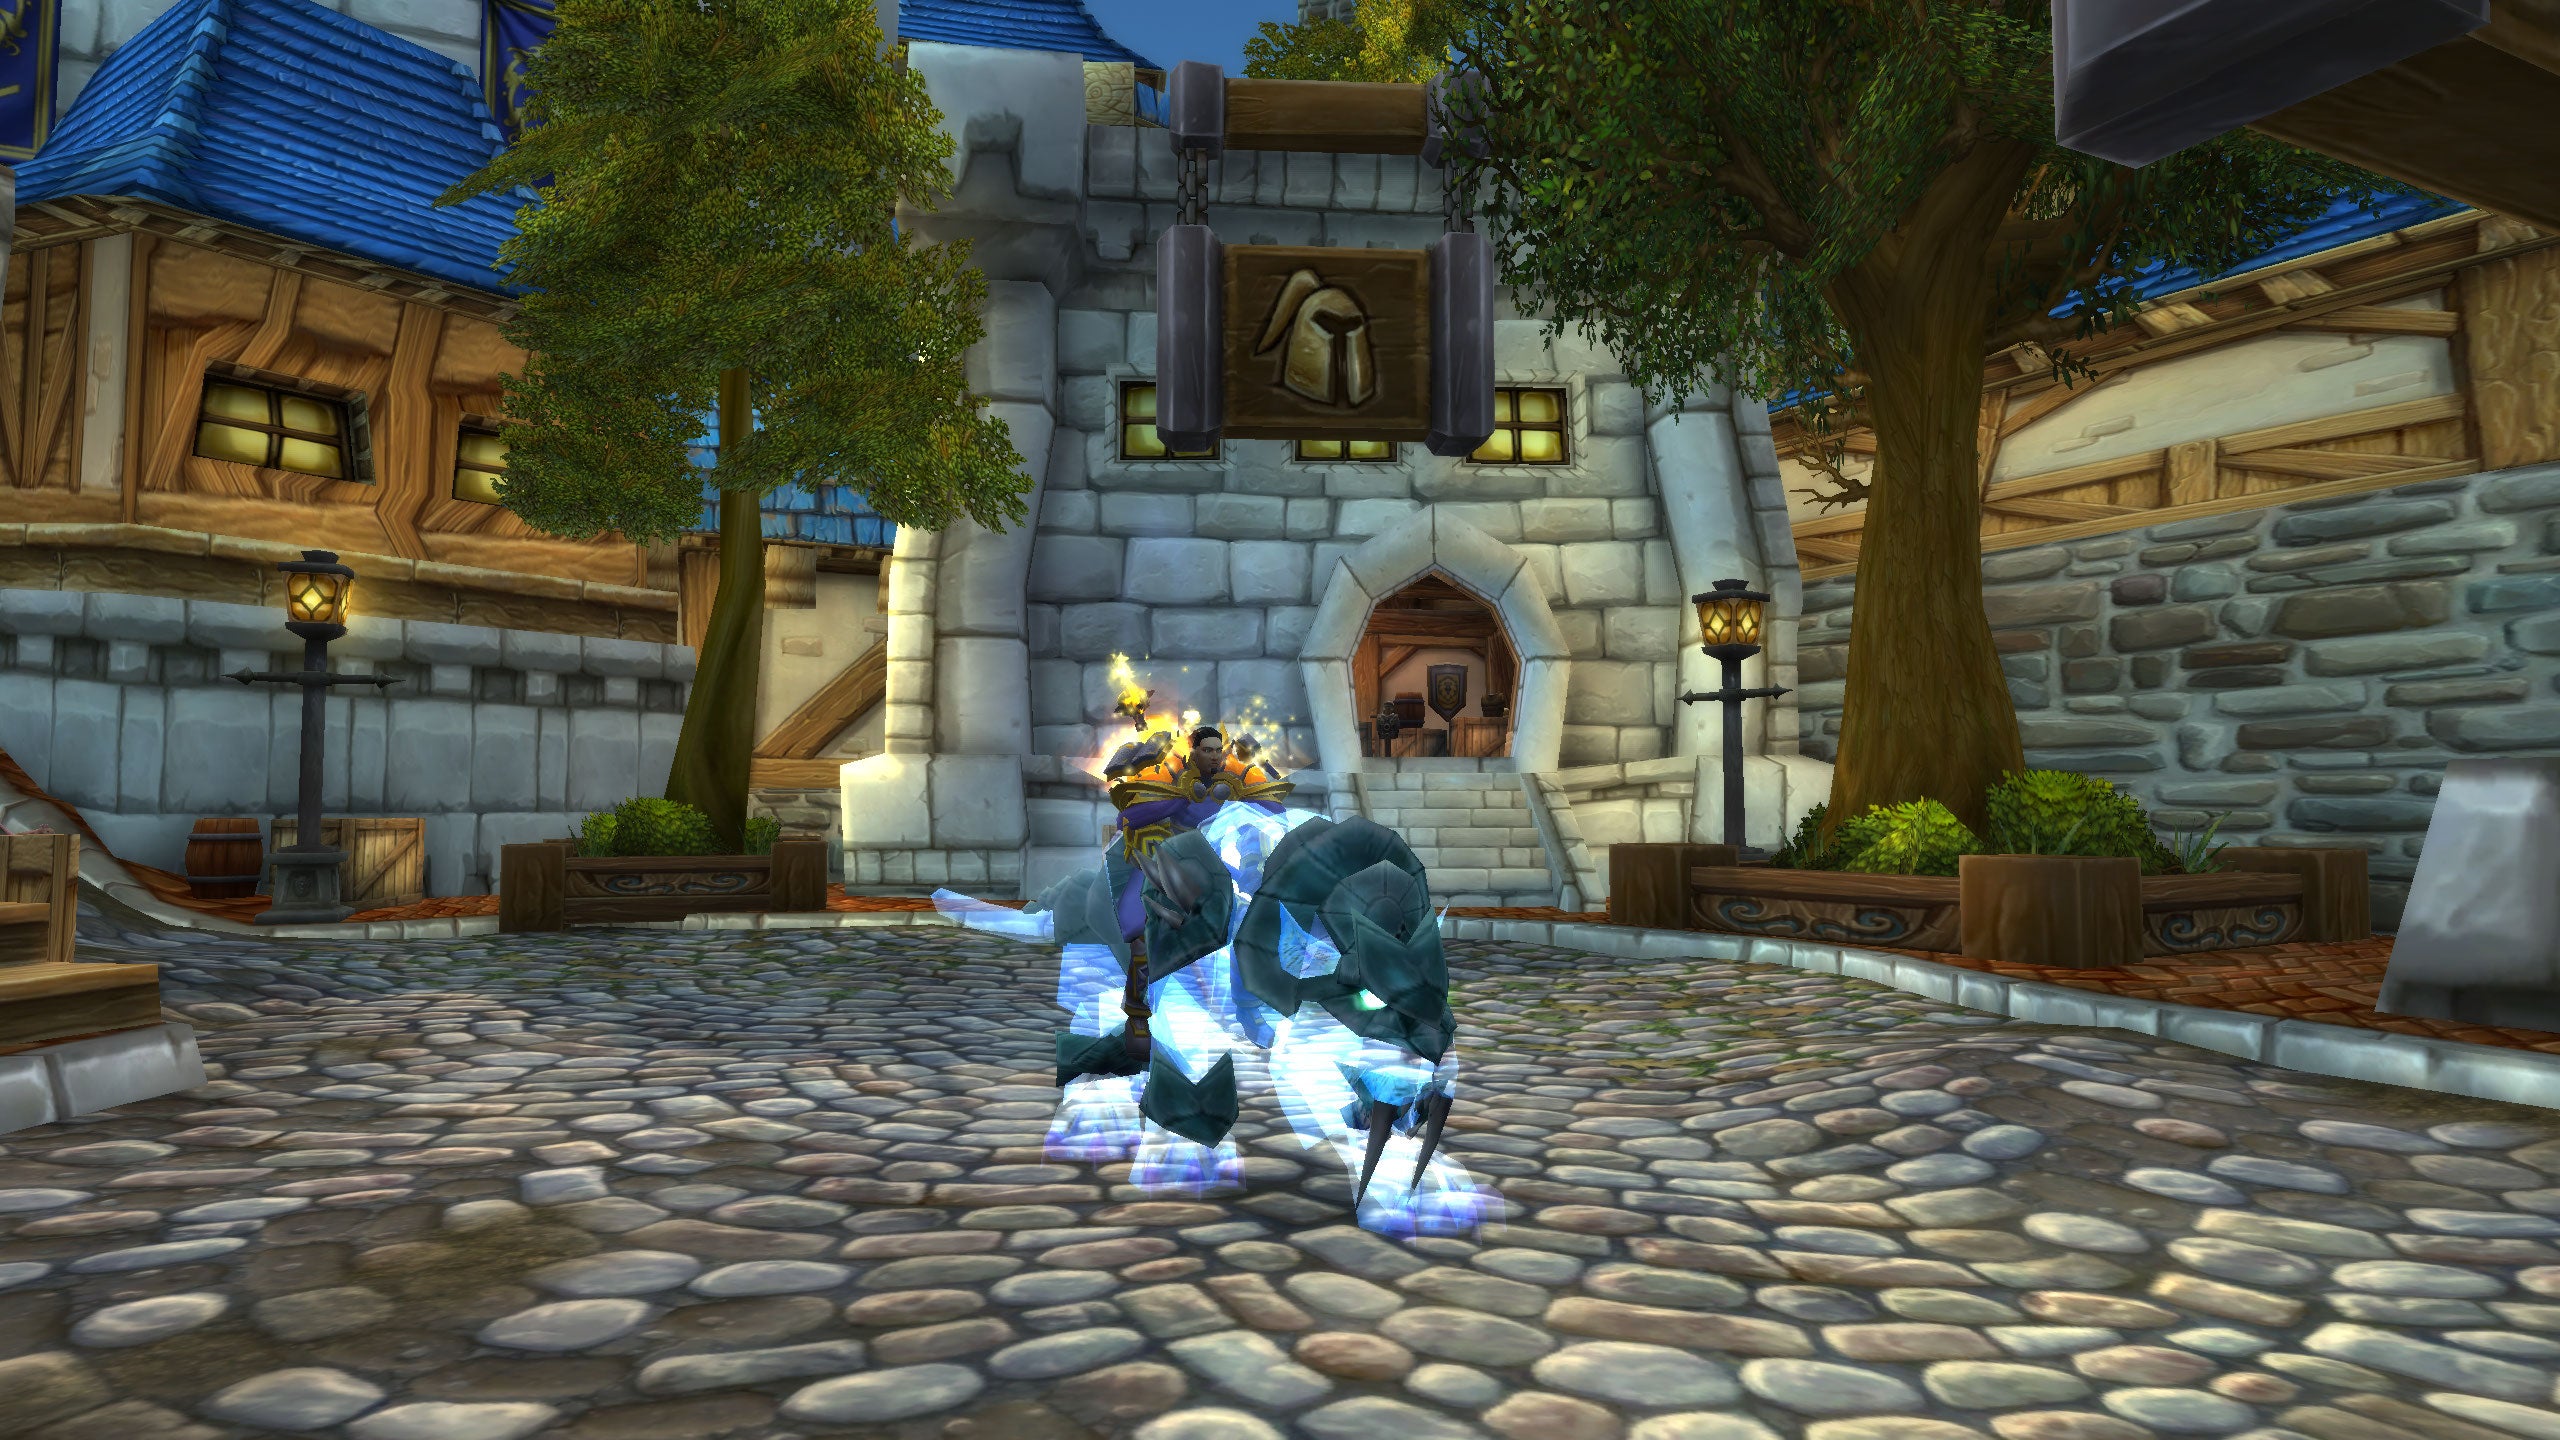 Swift Spectral Tiger - Magic Rooster - Mighty Caravan Brutosaur - 9x TCG Mounts - 13x MT Appearances - Challenge Mode Weapons